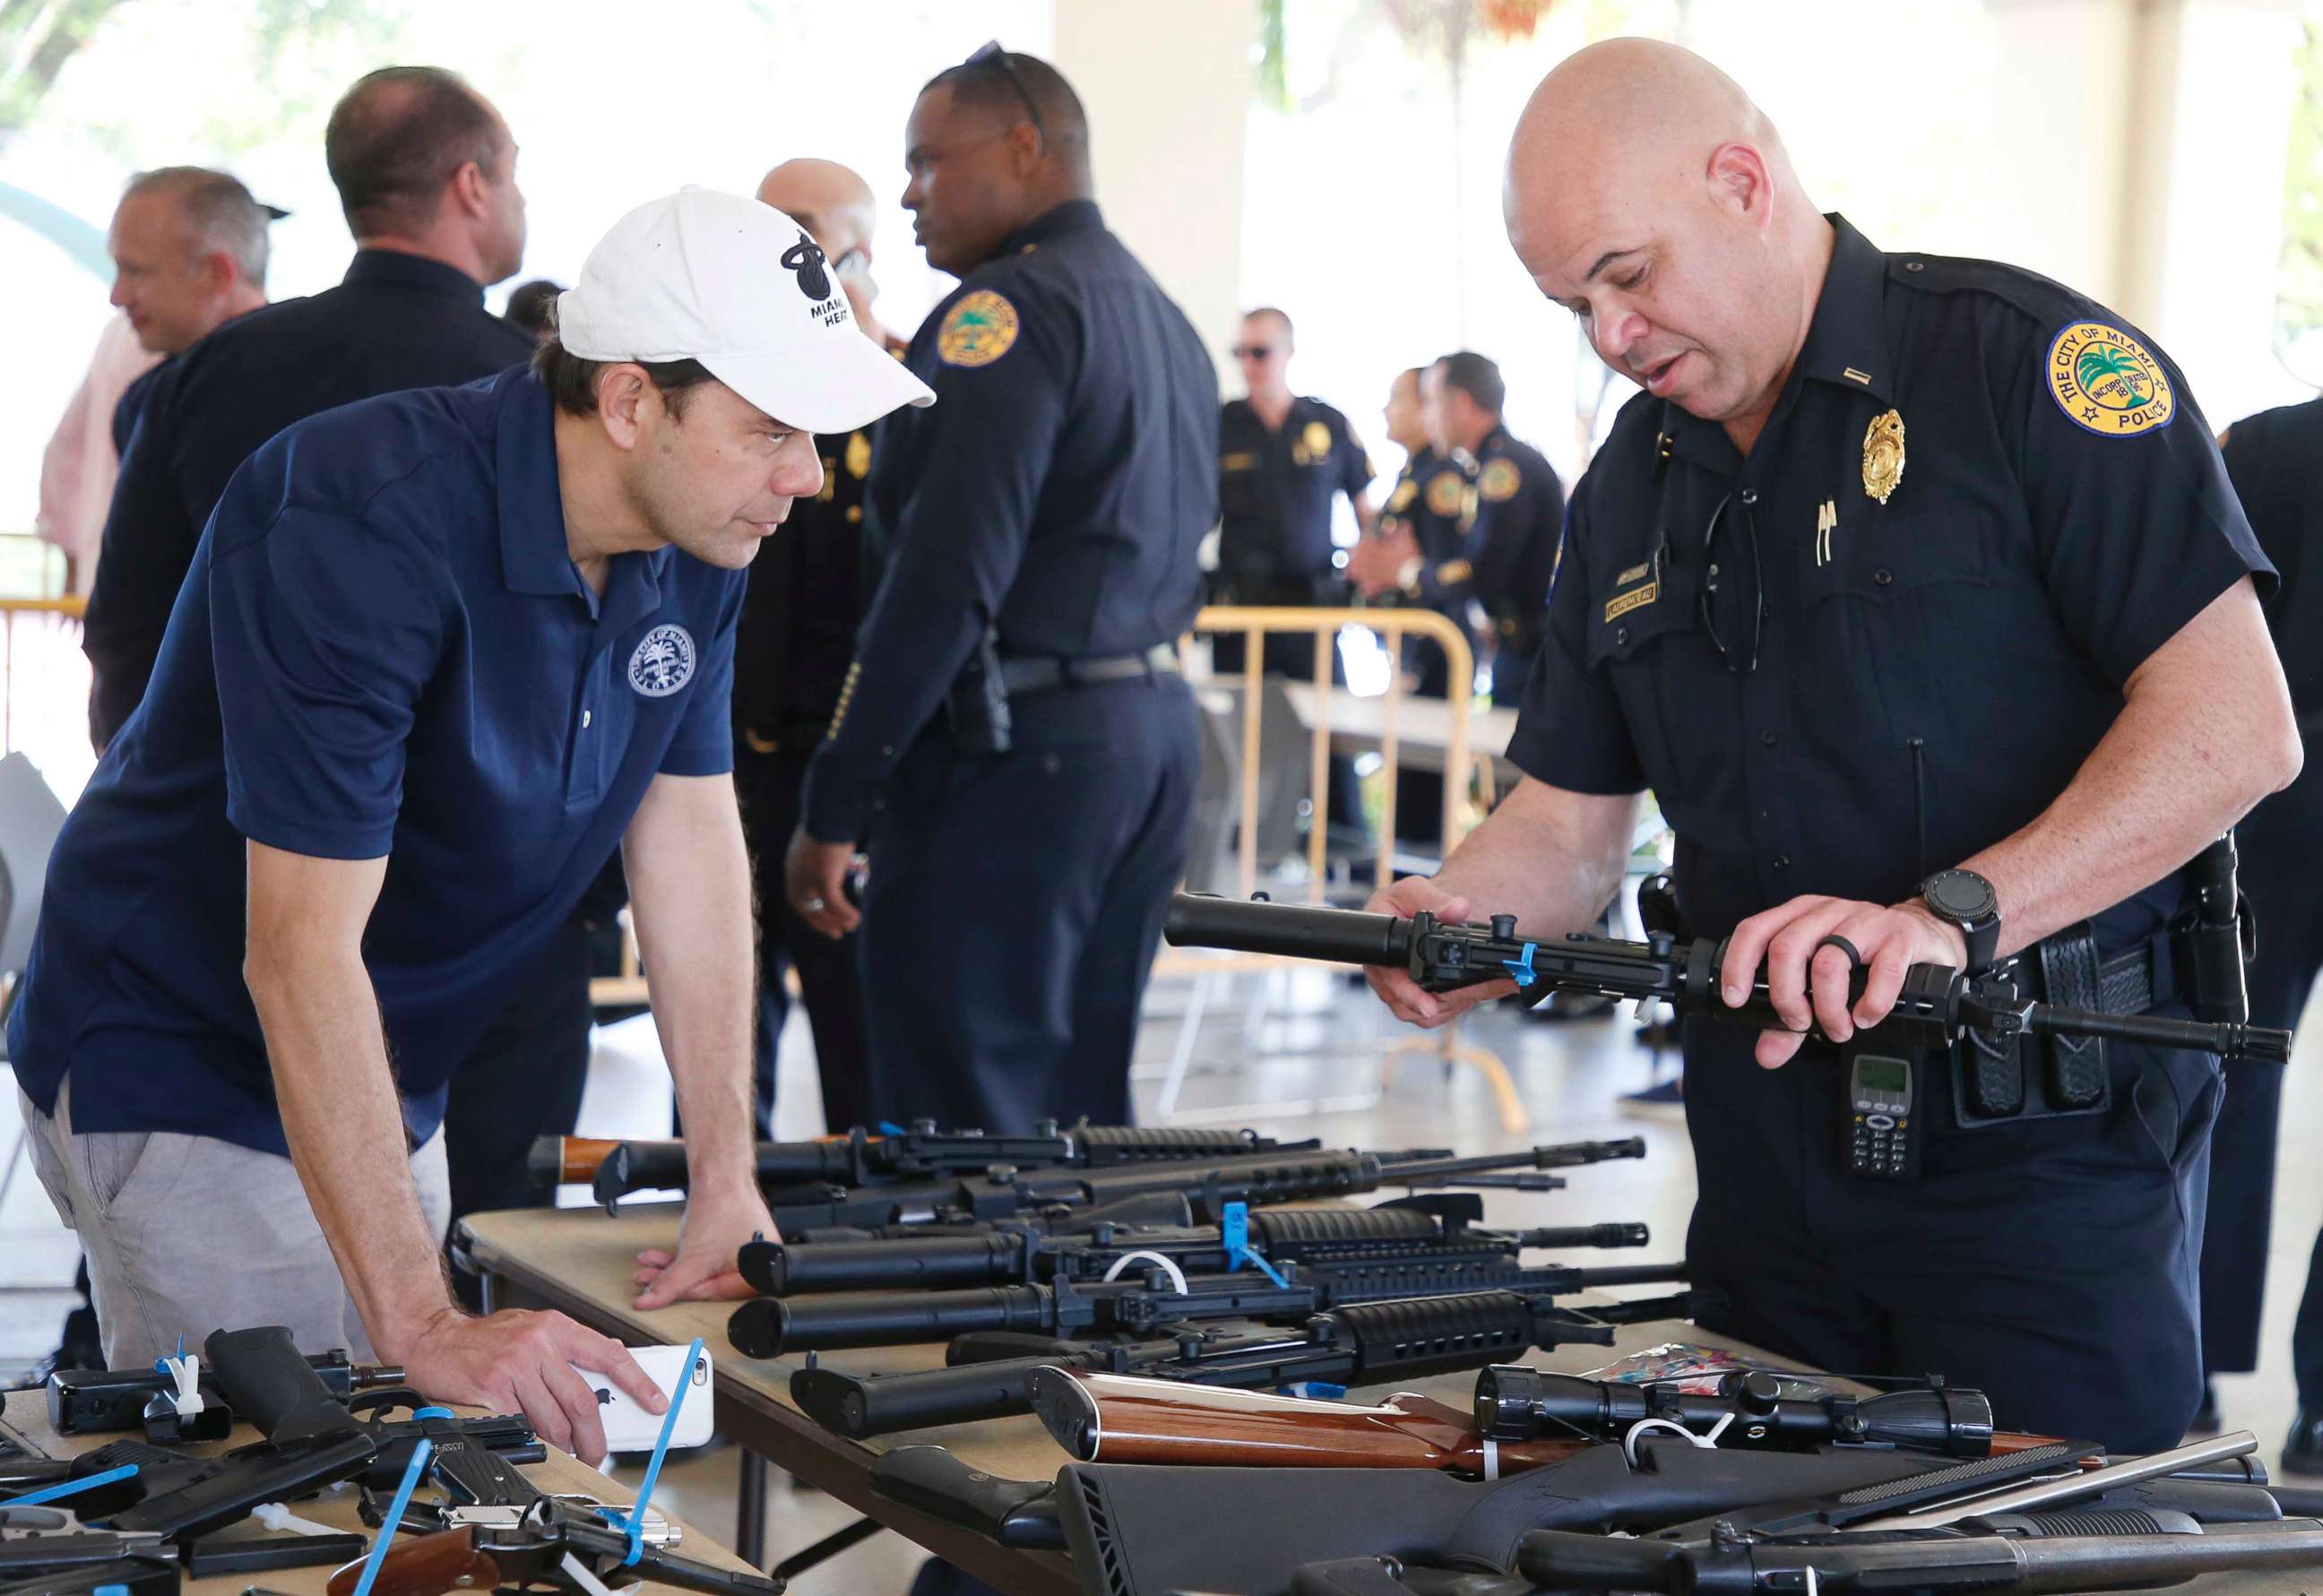 PHOTO: City of Miami Commissioner Ken Russell and City of Miami Police Officer Laurenceau look at some of the returned guns during a City of Miami gun buy-back event in Miami, March 17, 2018.